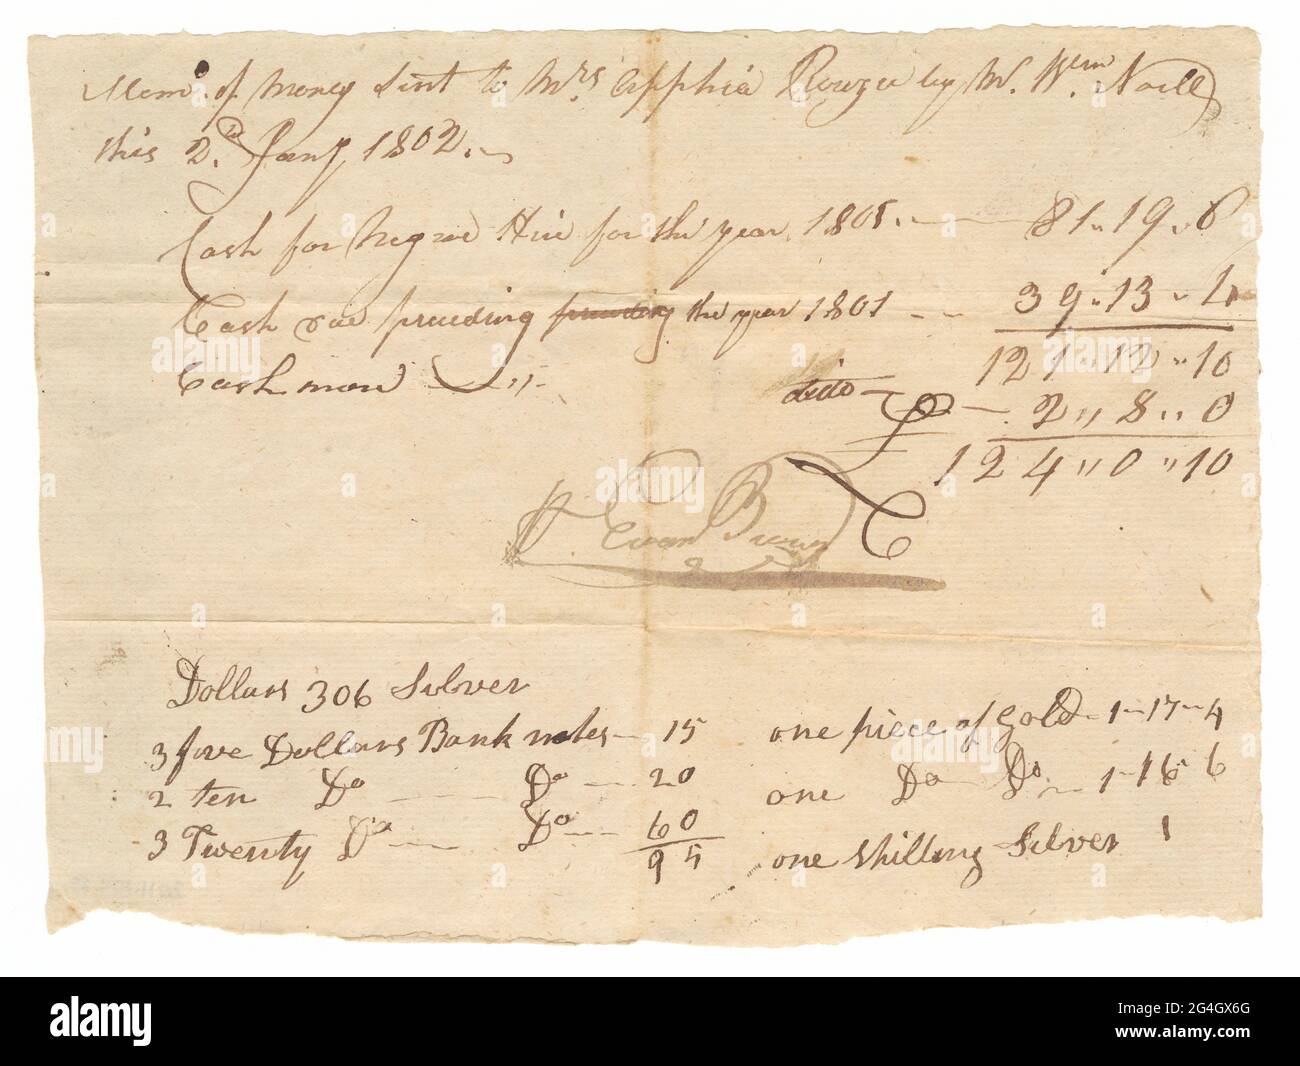 This document is from a collection of financial papers related to the plantation operations of several generations of the Rouzee Family in Essex County, Virginia. The papers date from the 1790s through 1860. This payment receipt describes the amount and method of payment given to Mrs. Apphia Rouzee by Mr. William Noel for &quot;Negroe Hire&quot; for the year 1801 and prior to 1801 by Mr. Evan Brown. A one page, single-sided document of faded black ink handwritten on paper. On the back of the document is written &quot;Evan Brown.&quot; Stock Photo